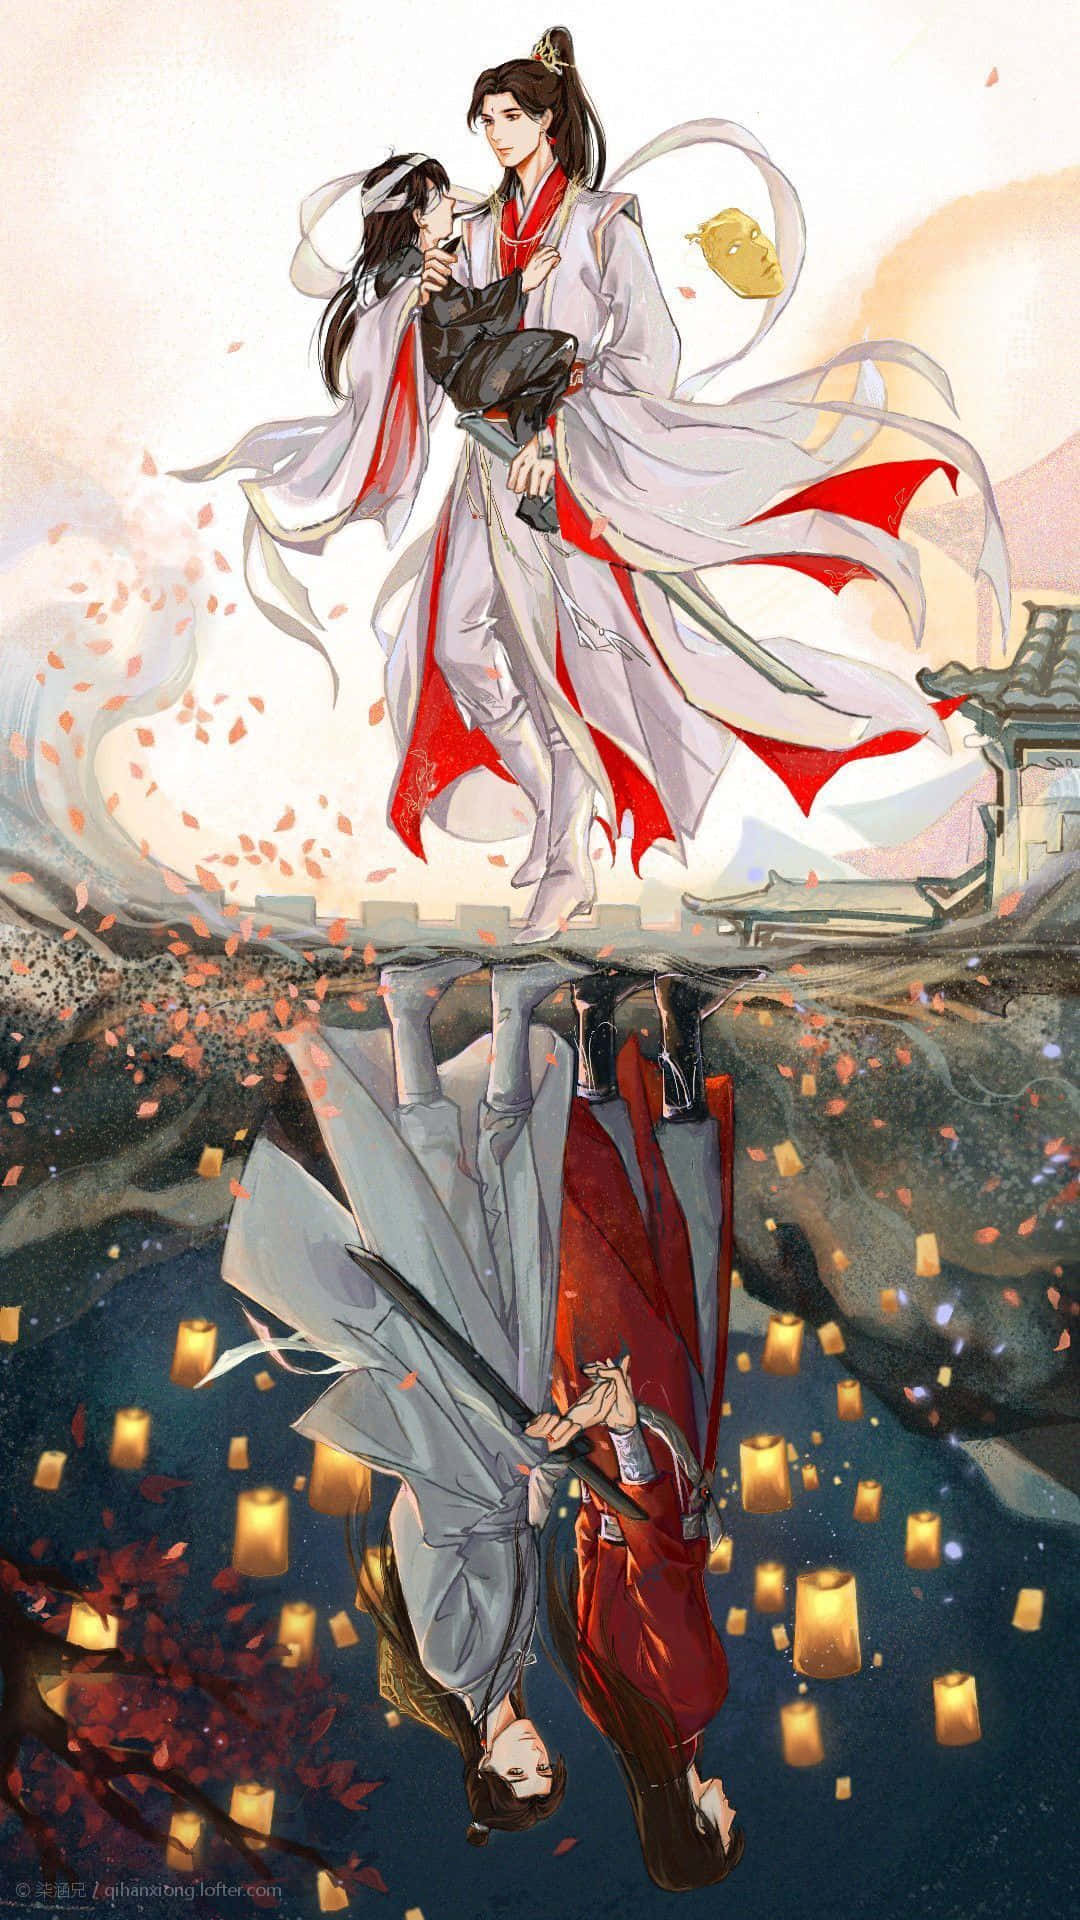 [100+] Heaven Officials Blessing Wallpapers | Wallpapers.com